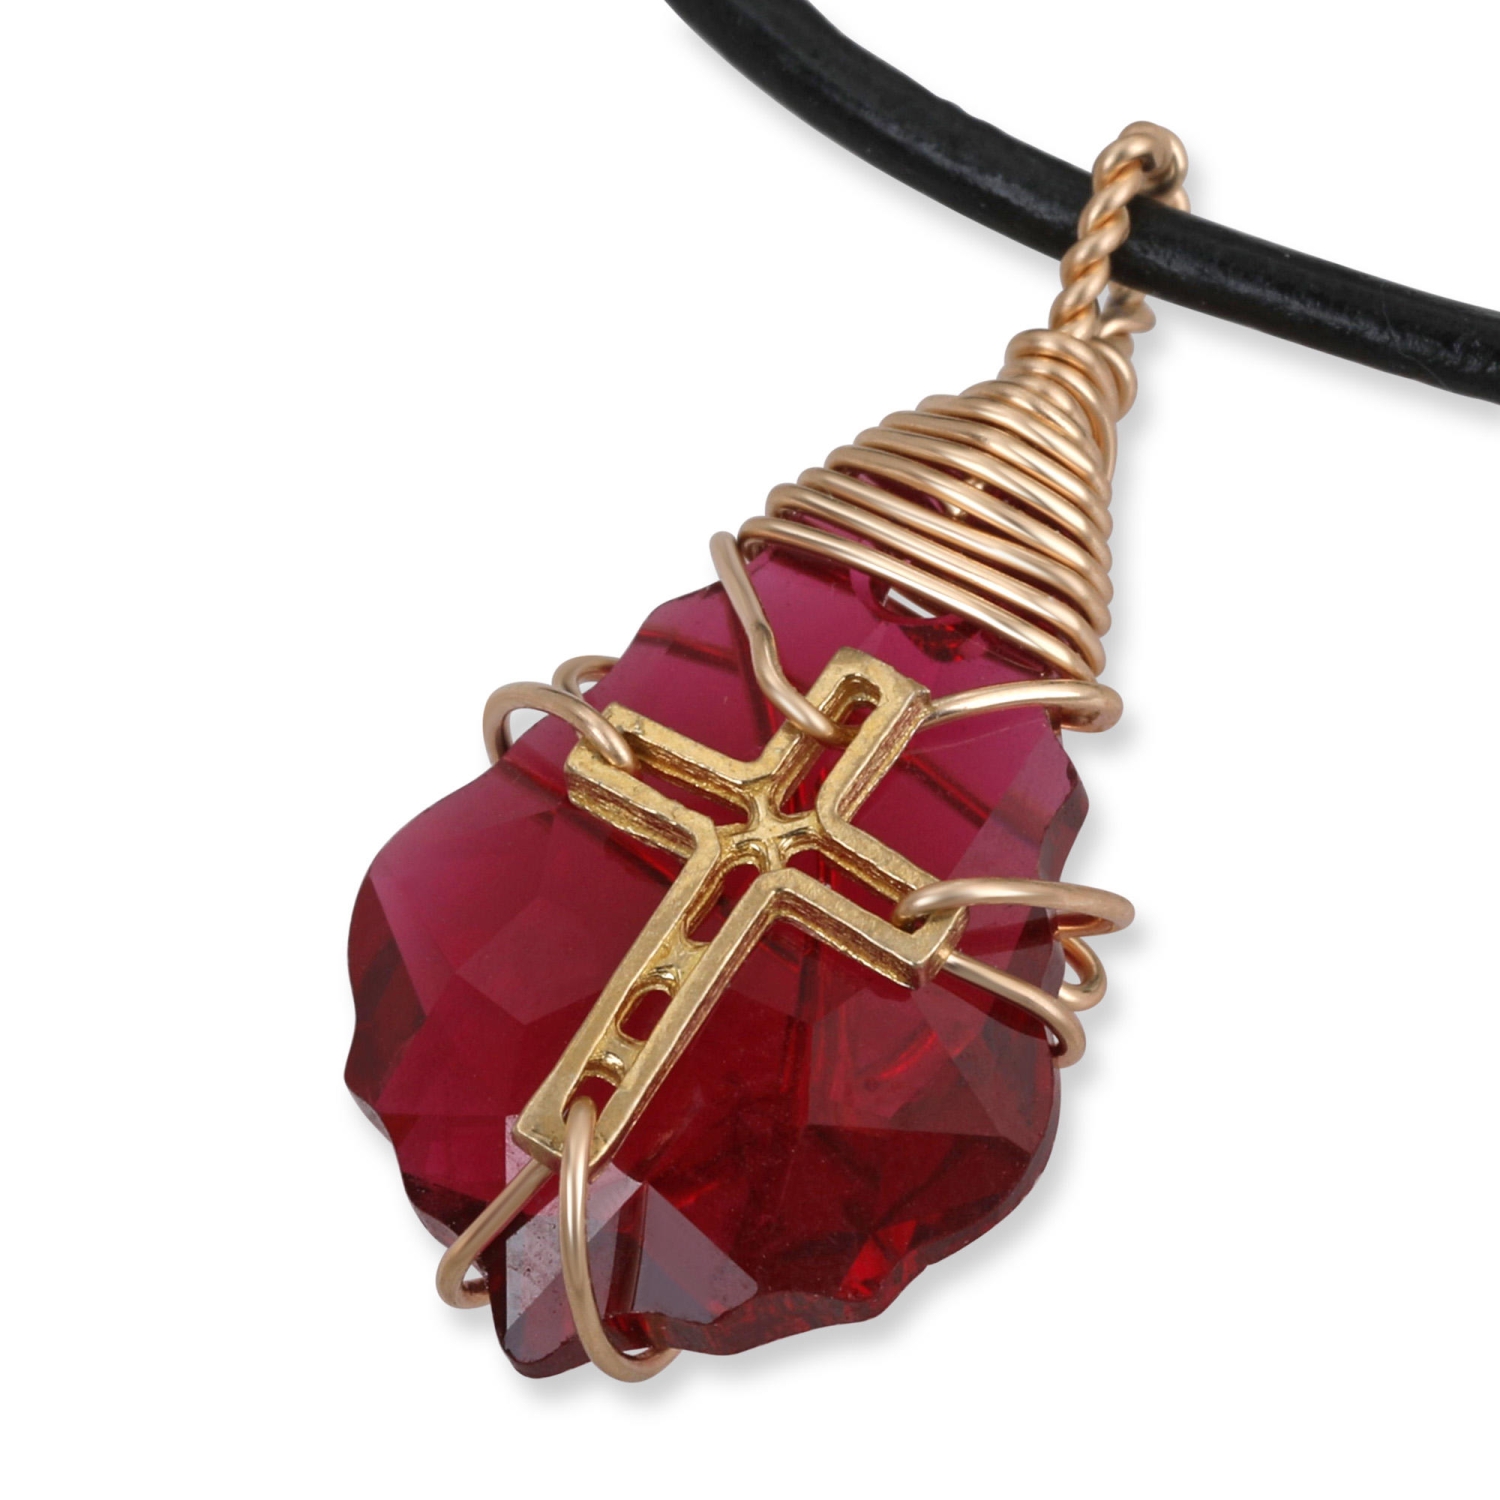 Swarovski Crystal and Gold Filled Postmodern Cross Necklace (Wine Red) - 1